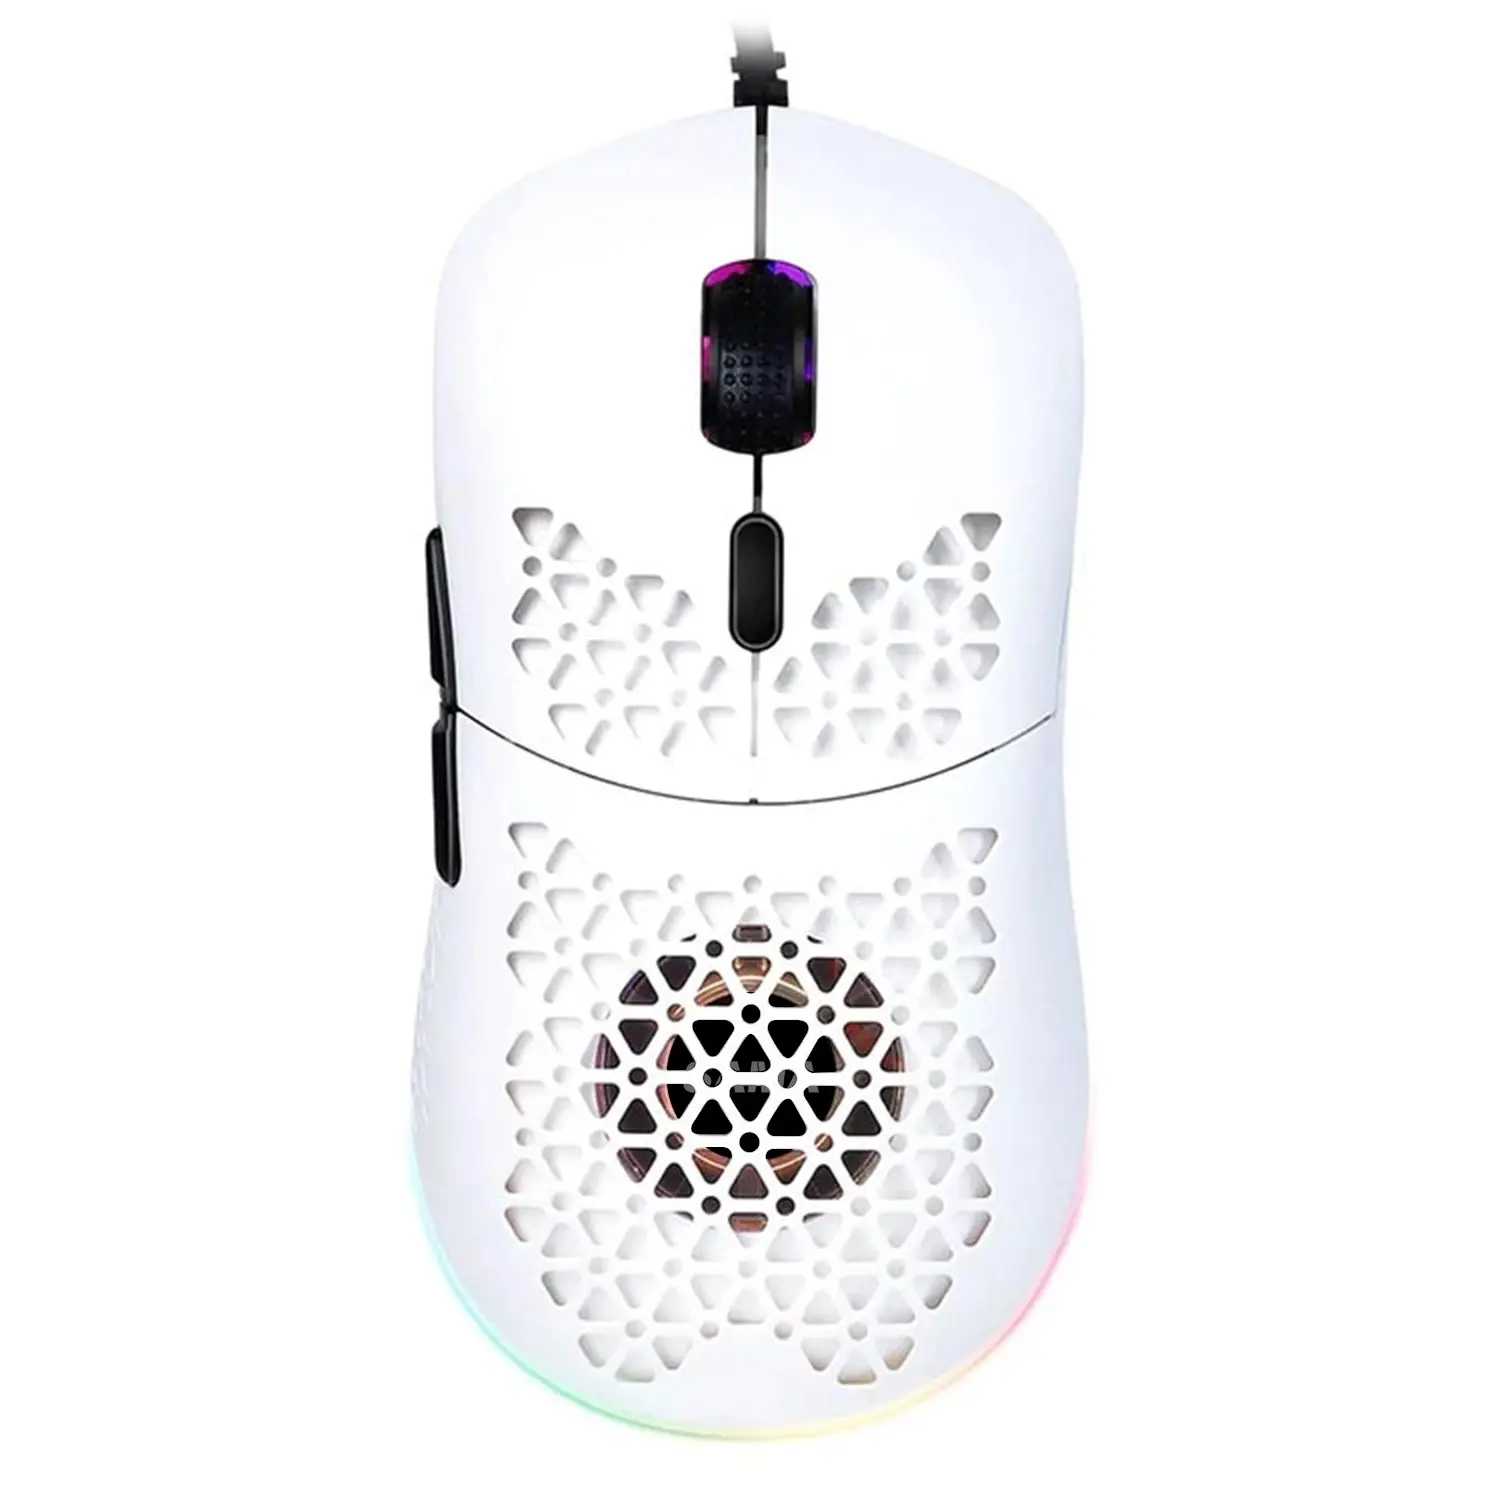 SAMA Manufacturers Hot Selling Wired Lightweight Honeycomb Desktop PC Gaming Mouse RGB Backlight Gamer Mice With Built-in Fan